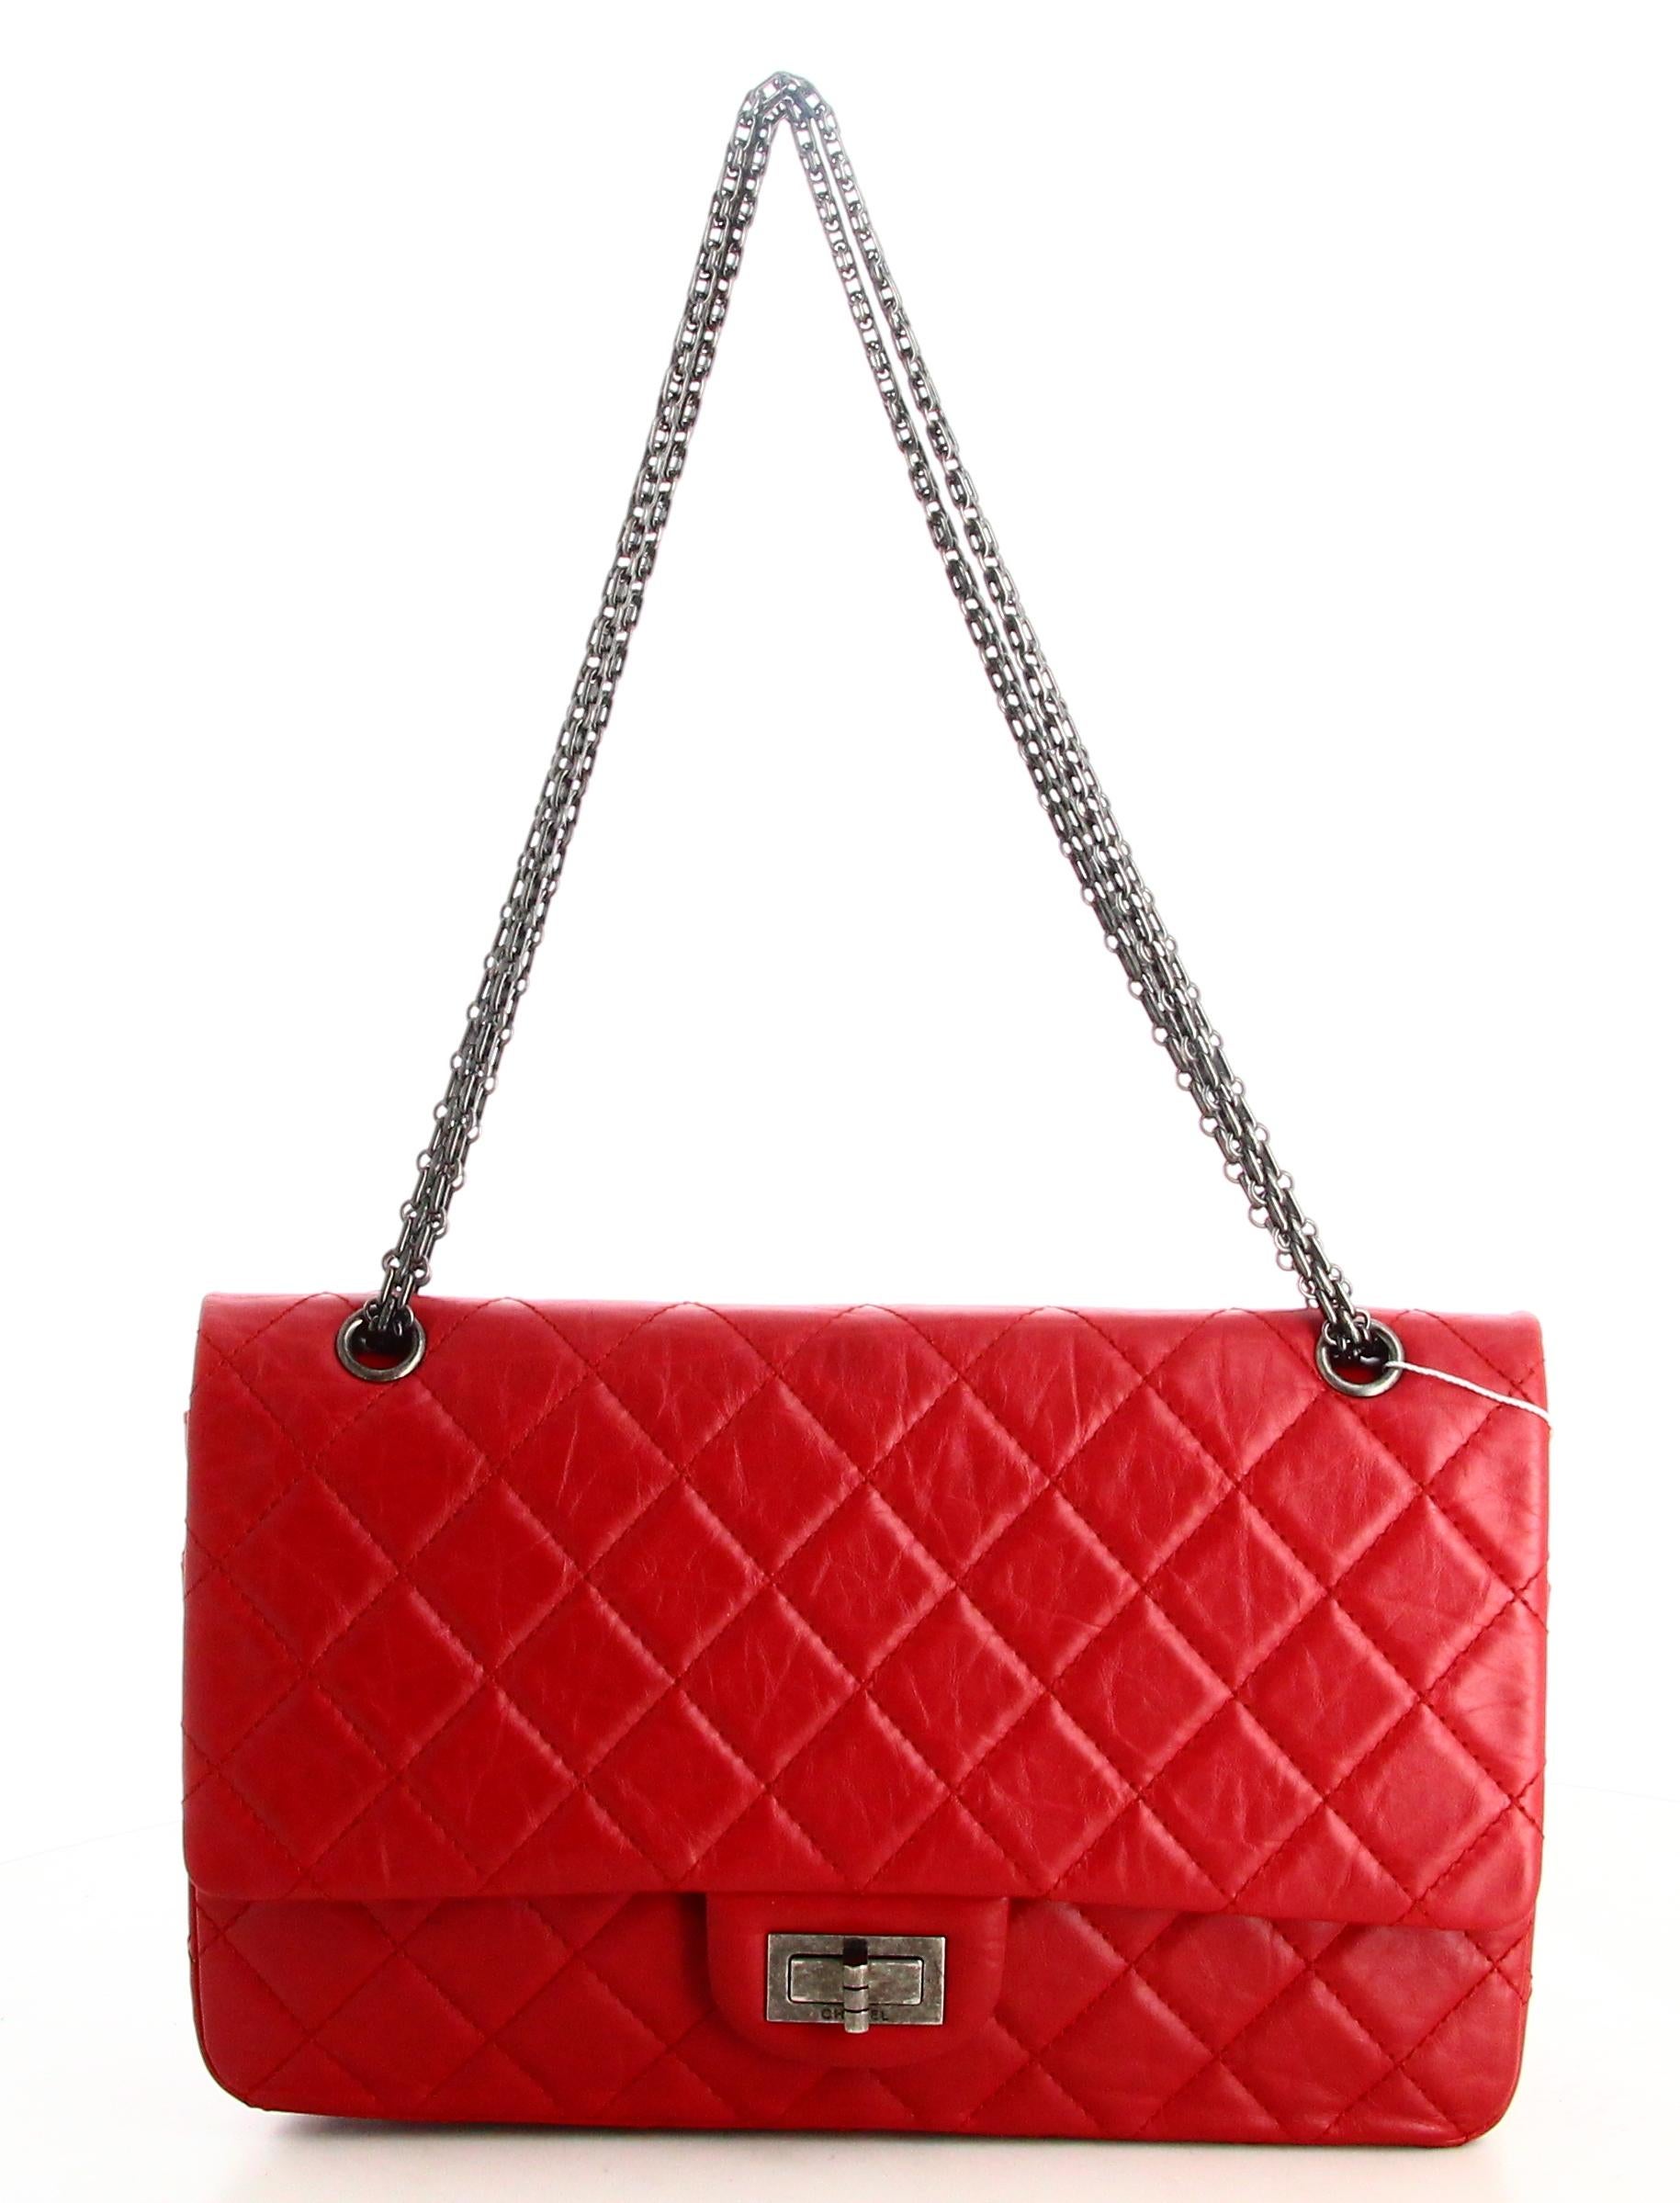 2011Chanel Reissue Handbag 227 Calfskin Double Flap

- Very good condition. Shows very slight signs of wear over time.
- Chanel Handbag 
- Red quilted leather
- Silver double chain 
- Clasp: silver 
- Interior: red leather plus inside pockets